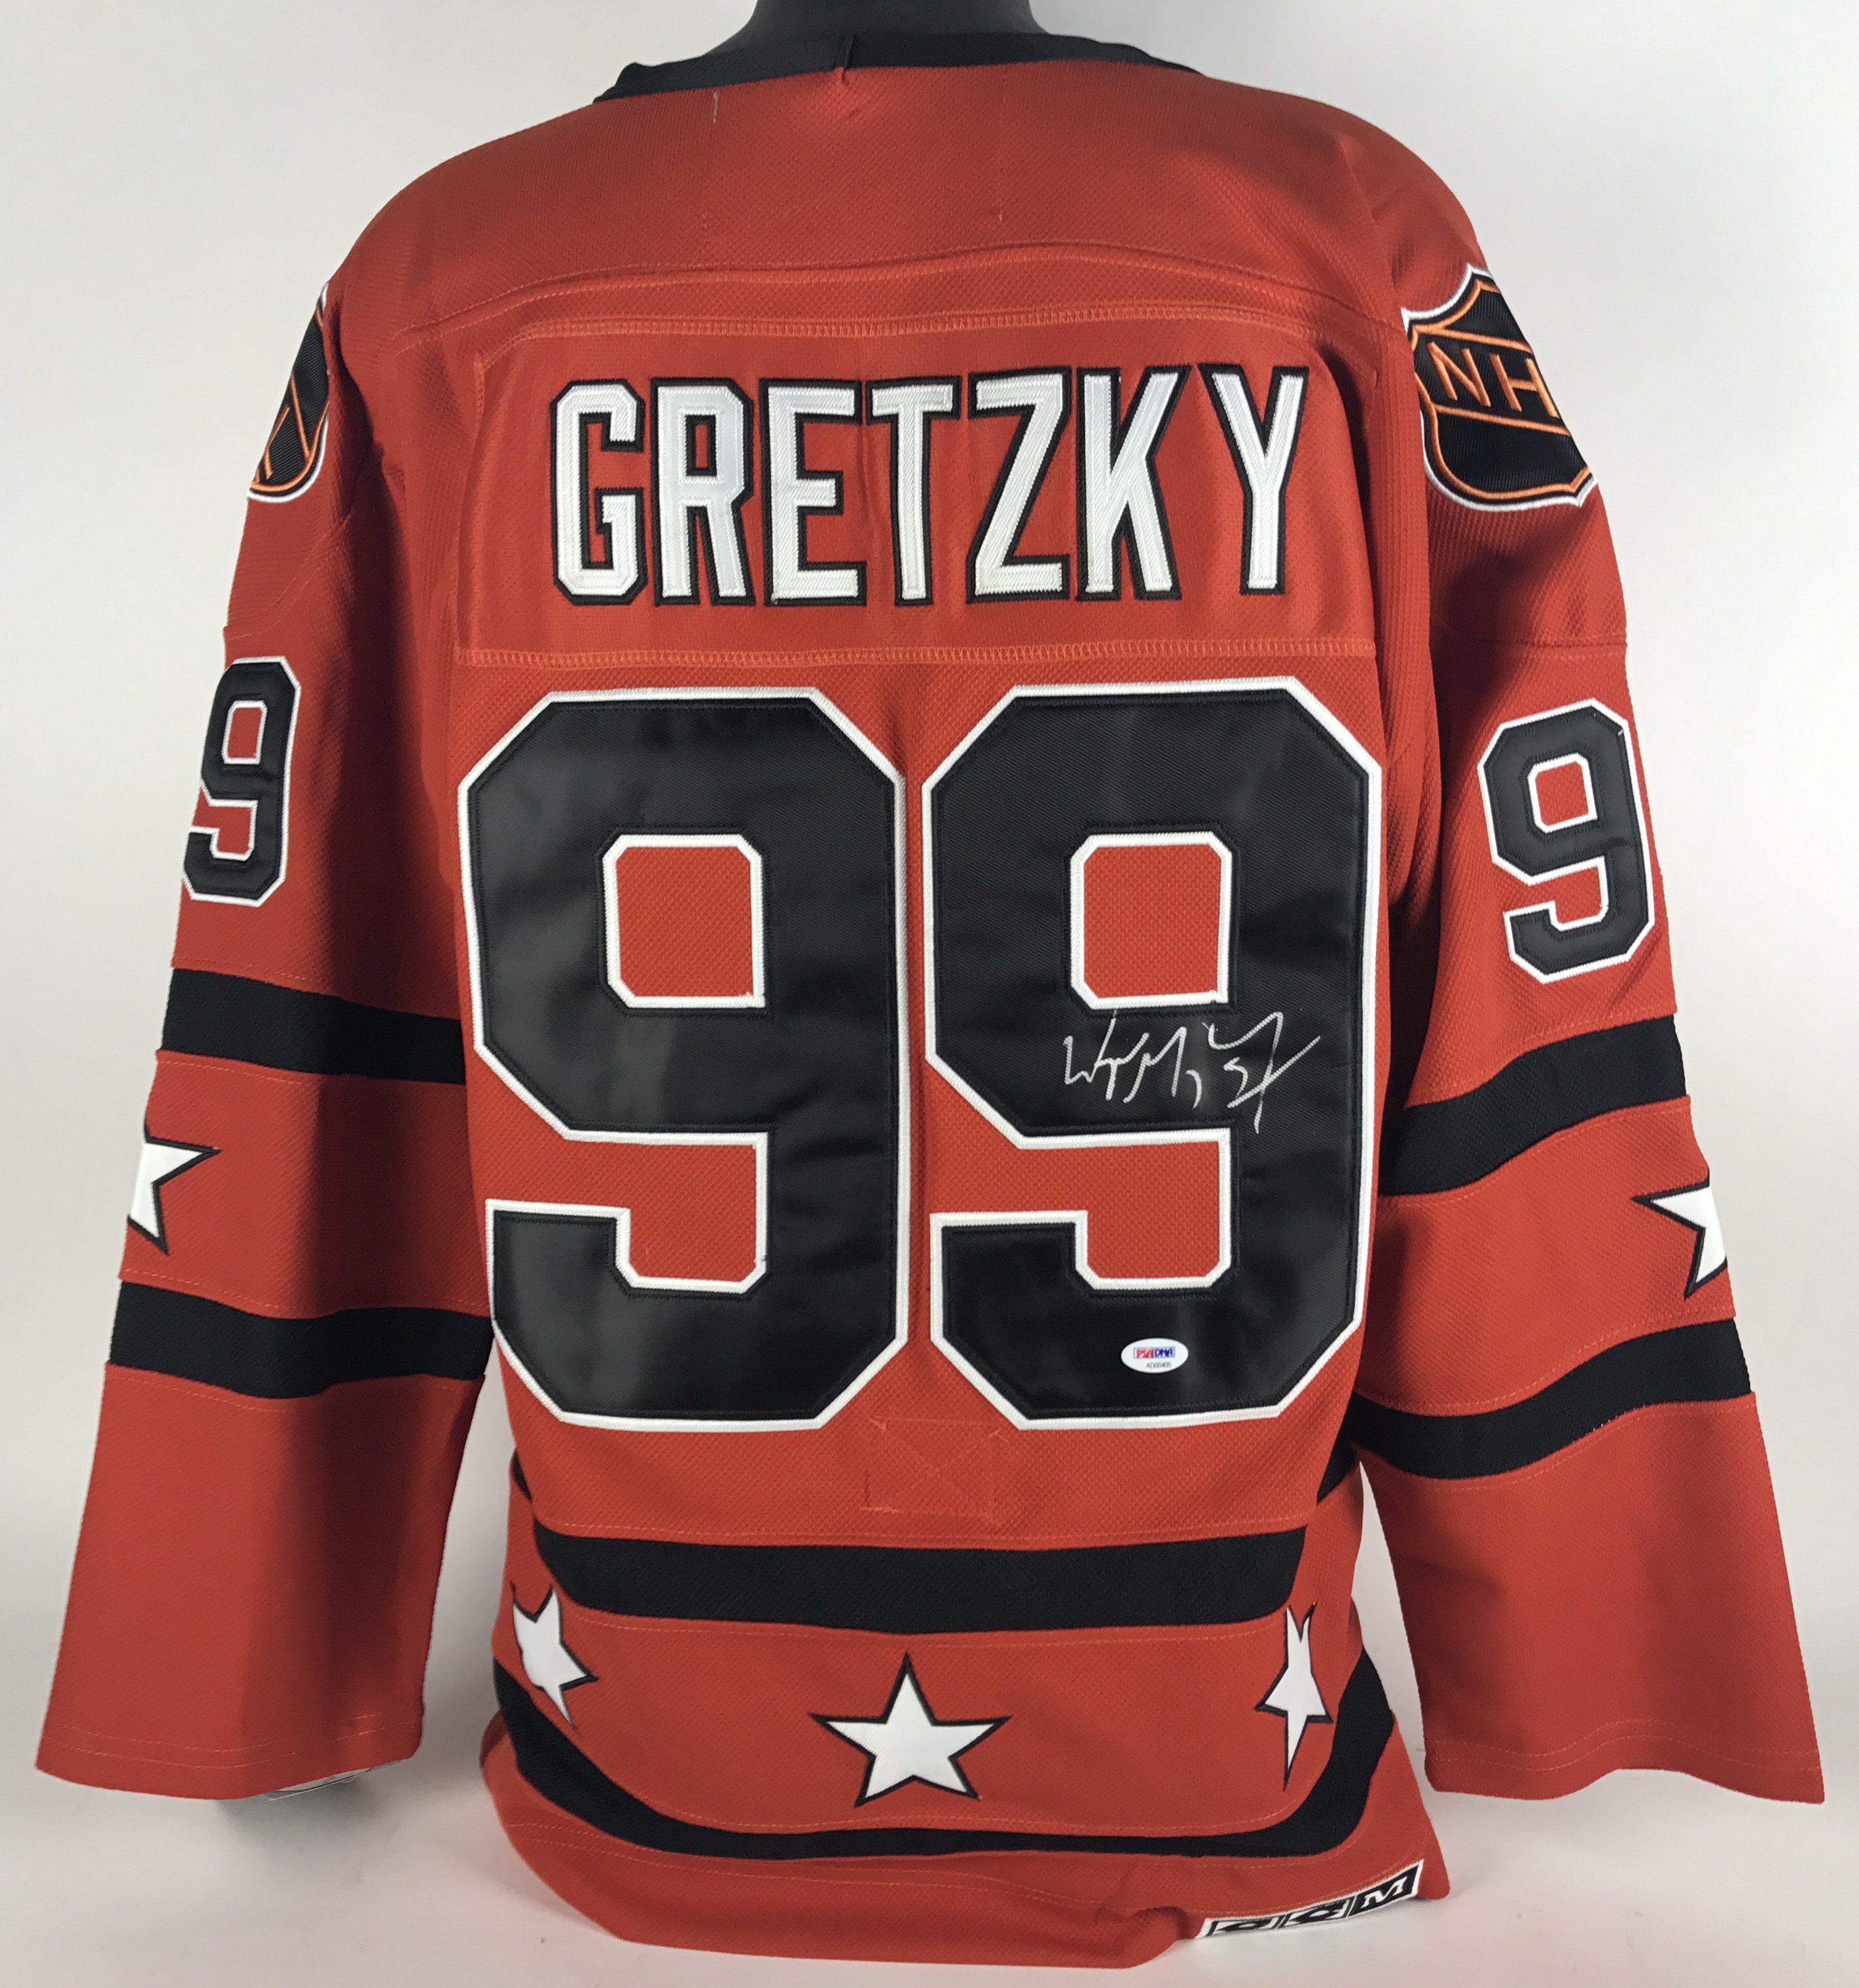 Wayne Gretzky Signed / Autographed 1980 NHL All Star Game Jersey